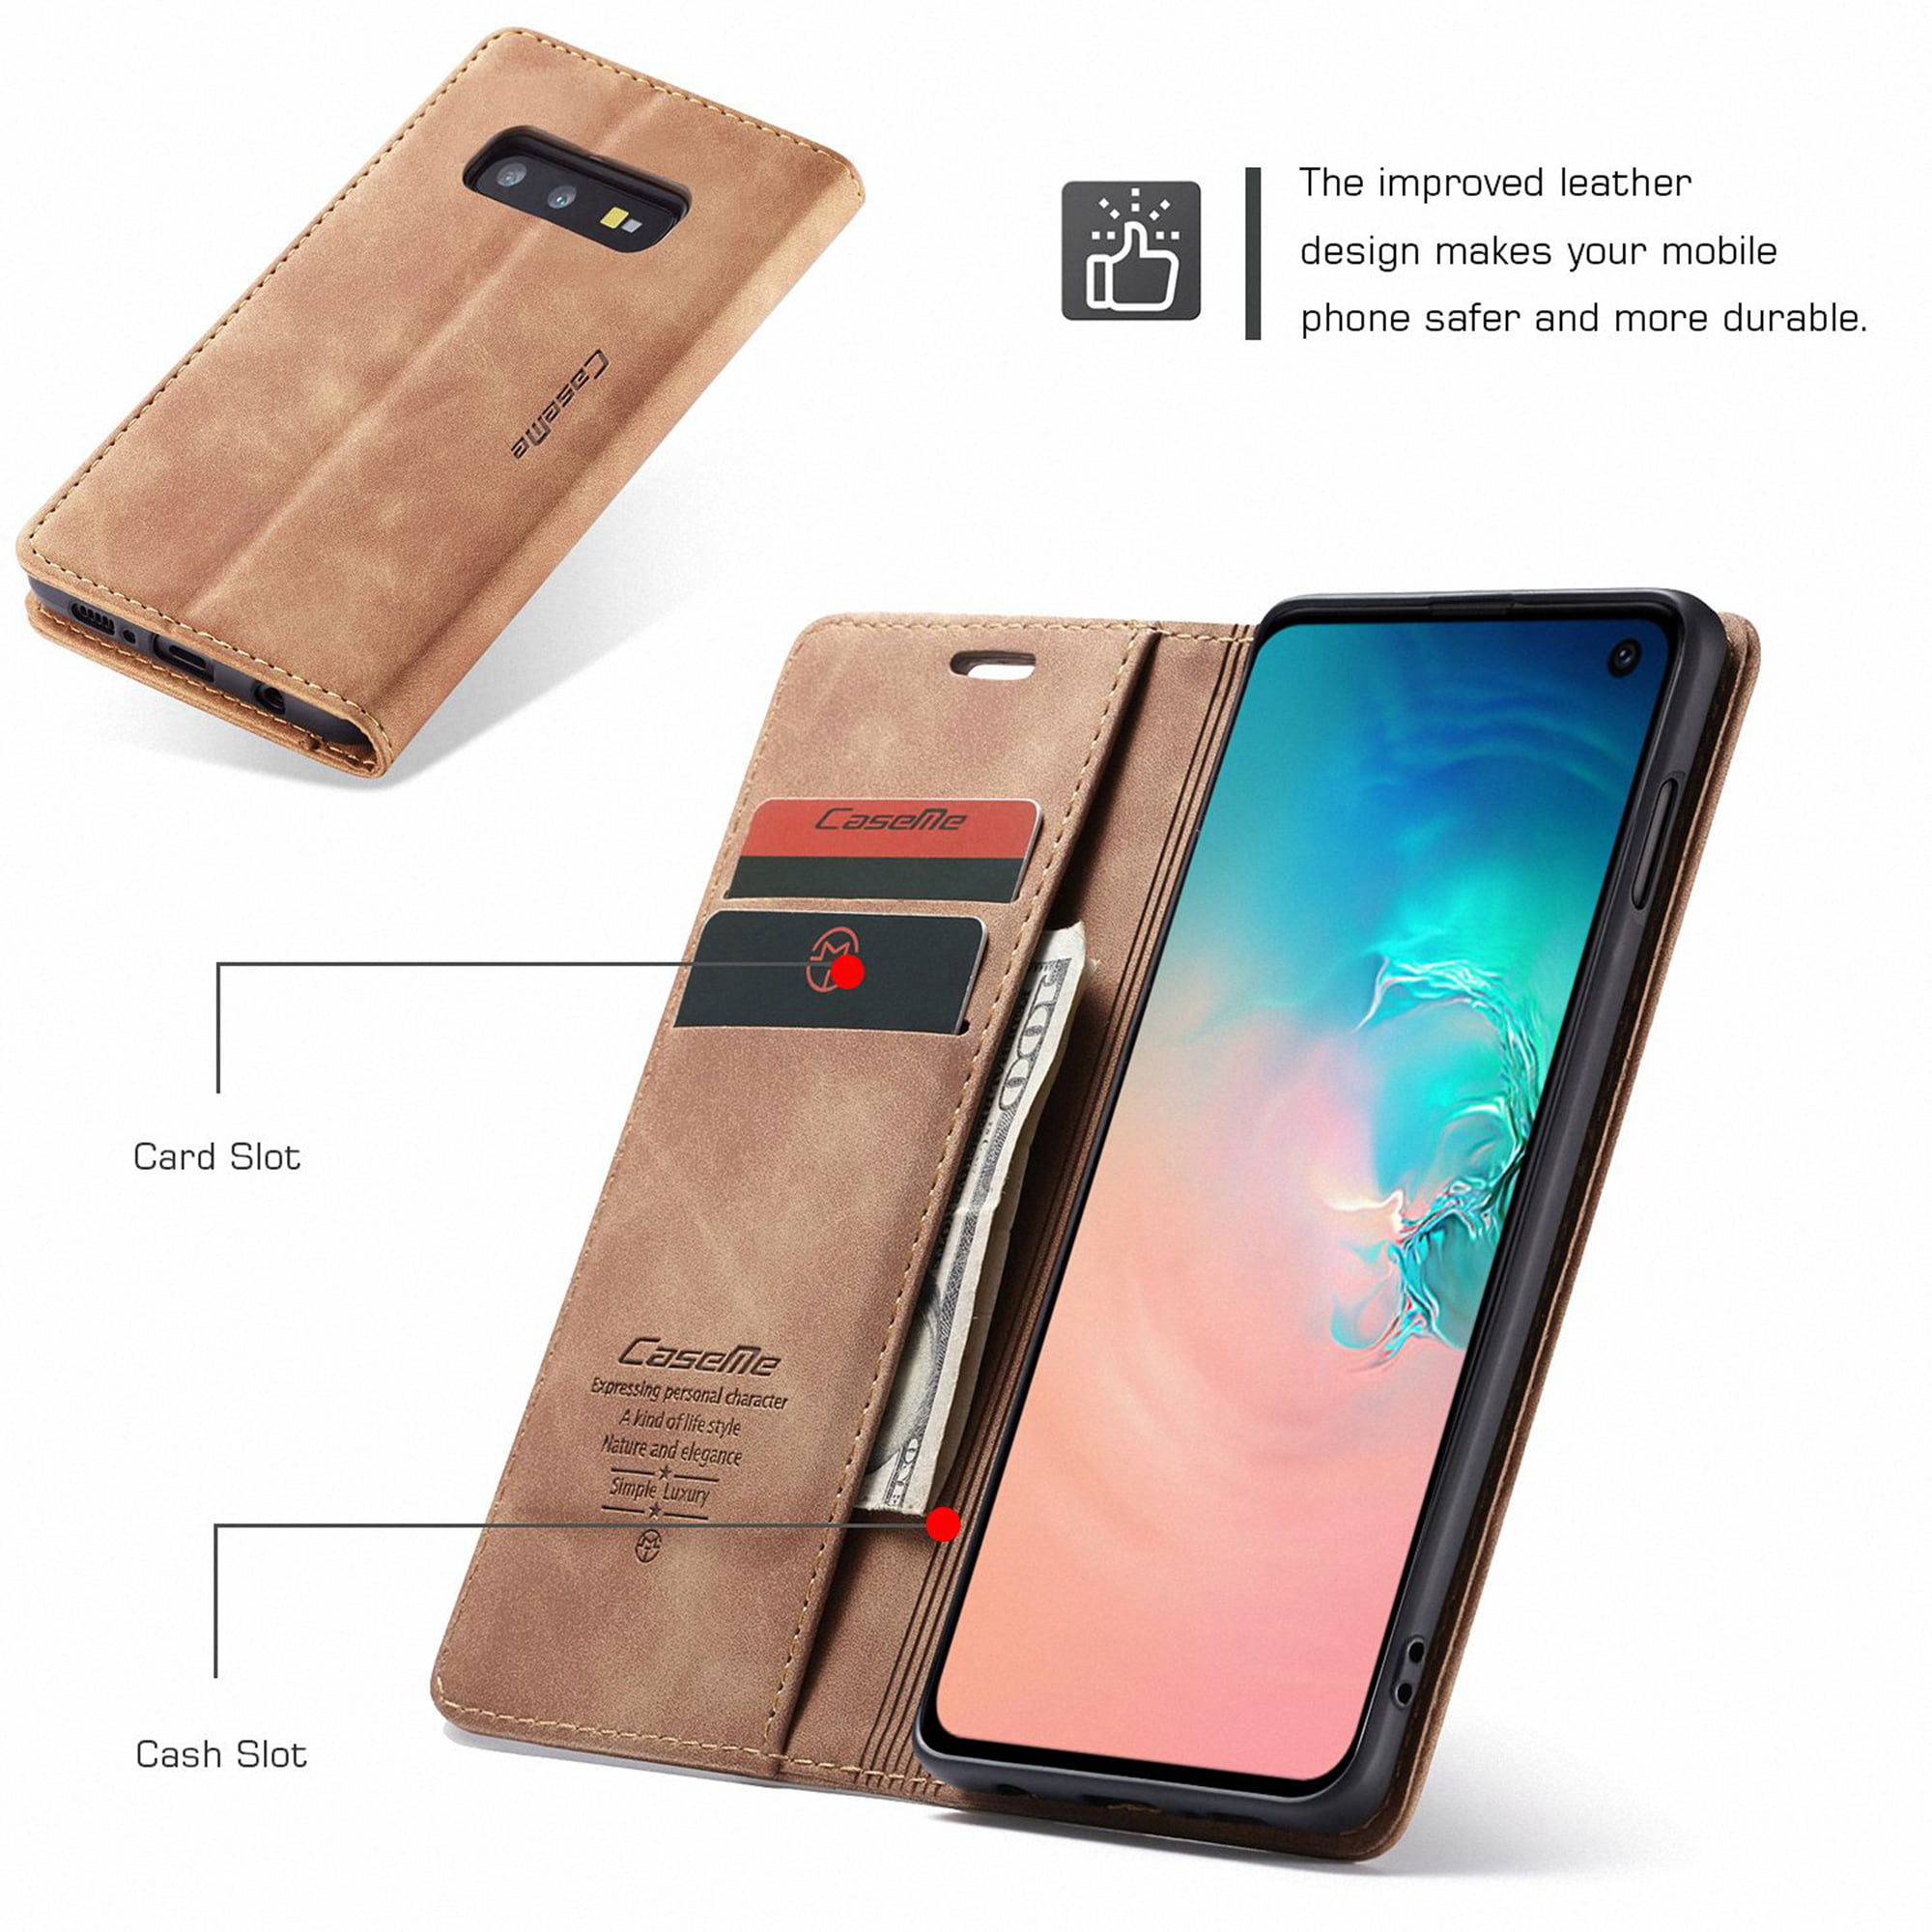 Shockproof Flip Case Cover for Samsung Galaxy S10e Lomogo Leather Wallet Case for Galaxy S10e with Stand Feature Card Holder Magnetic Closure LOYYO080313 Black